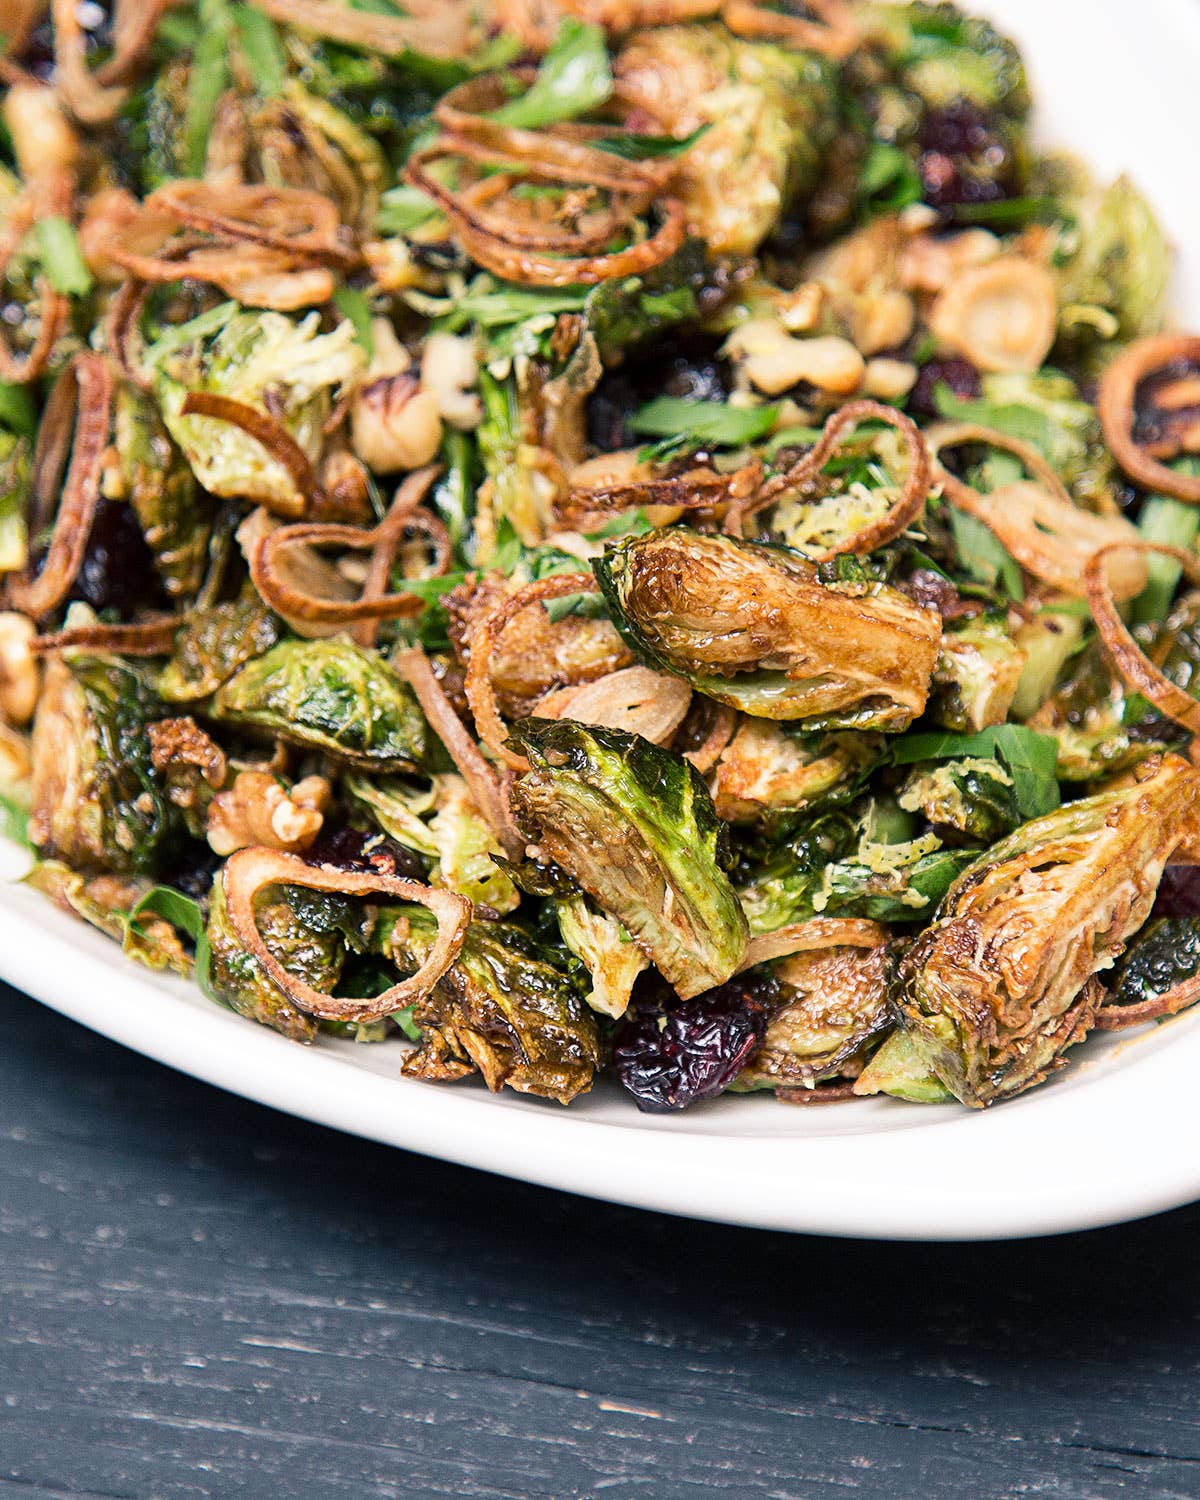 Sara Gore's Fried Brussel Sprouts